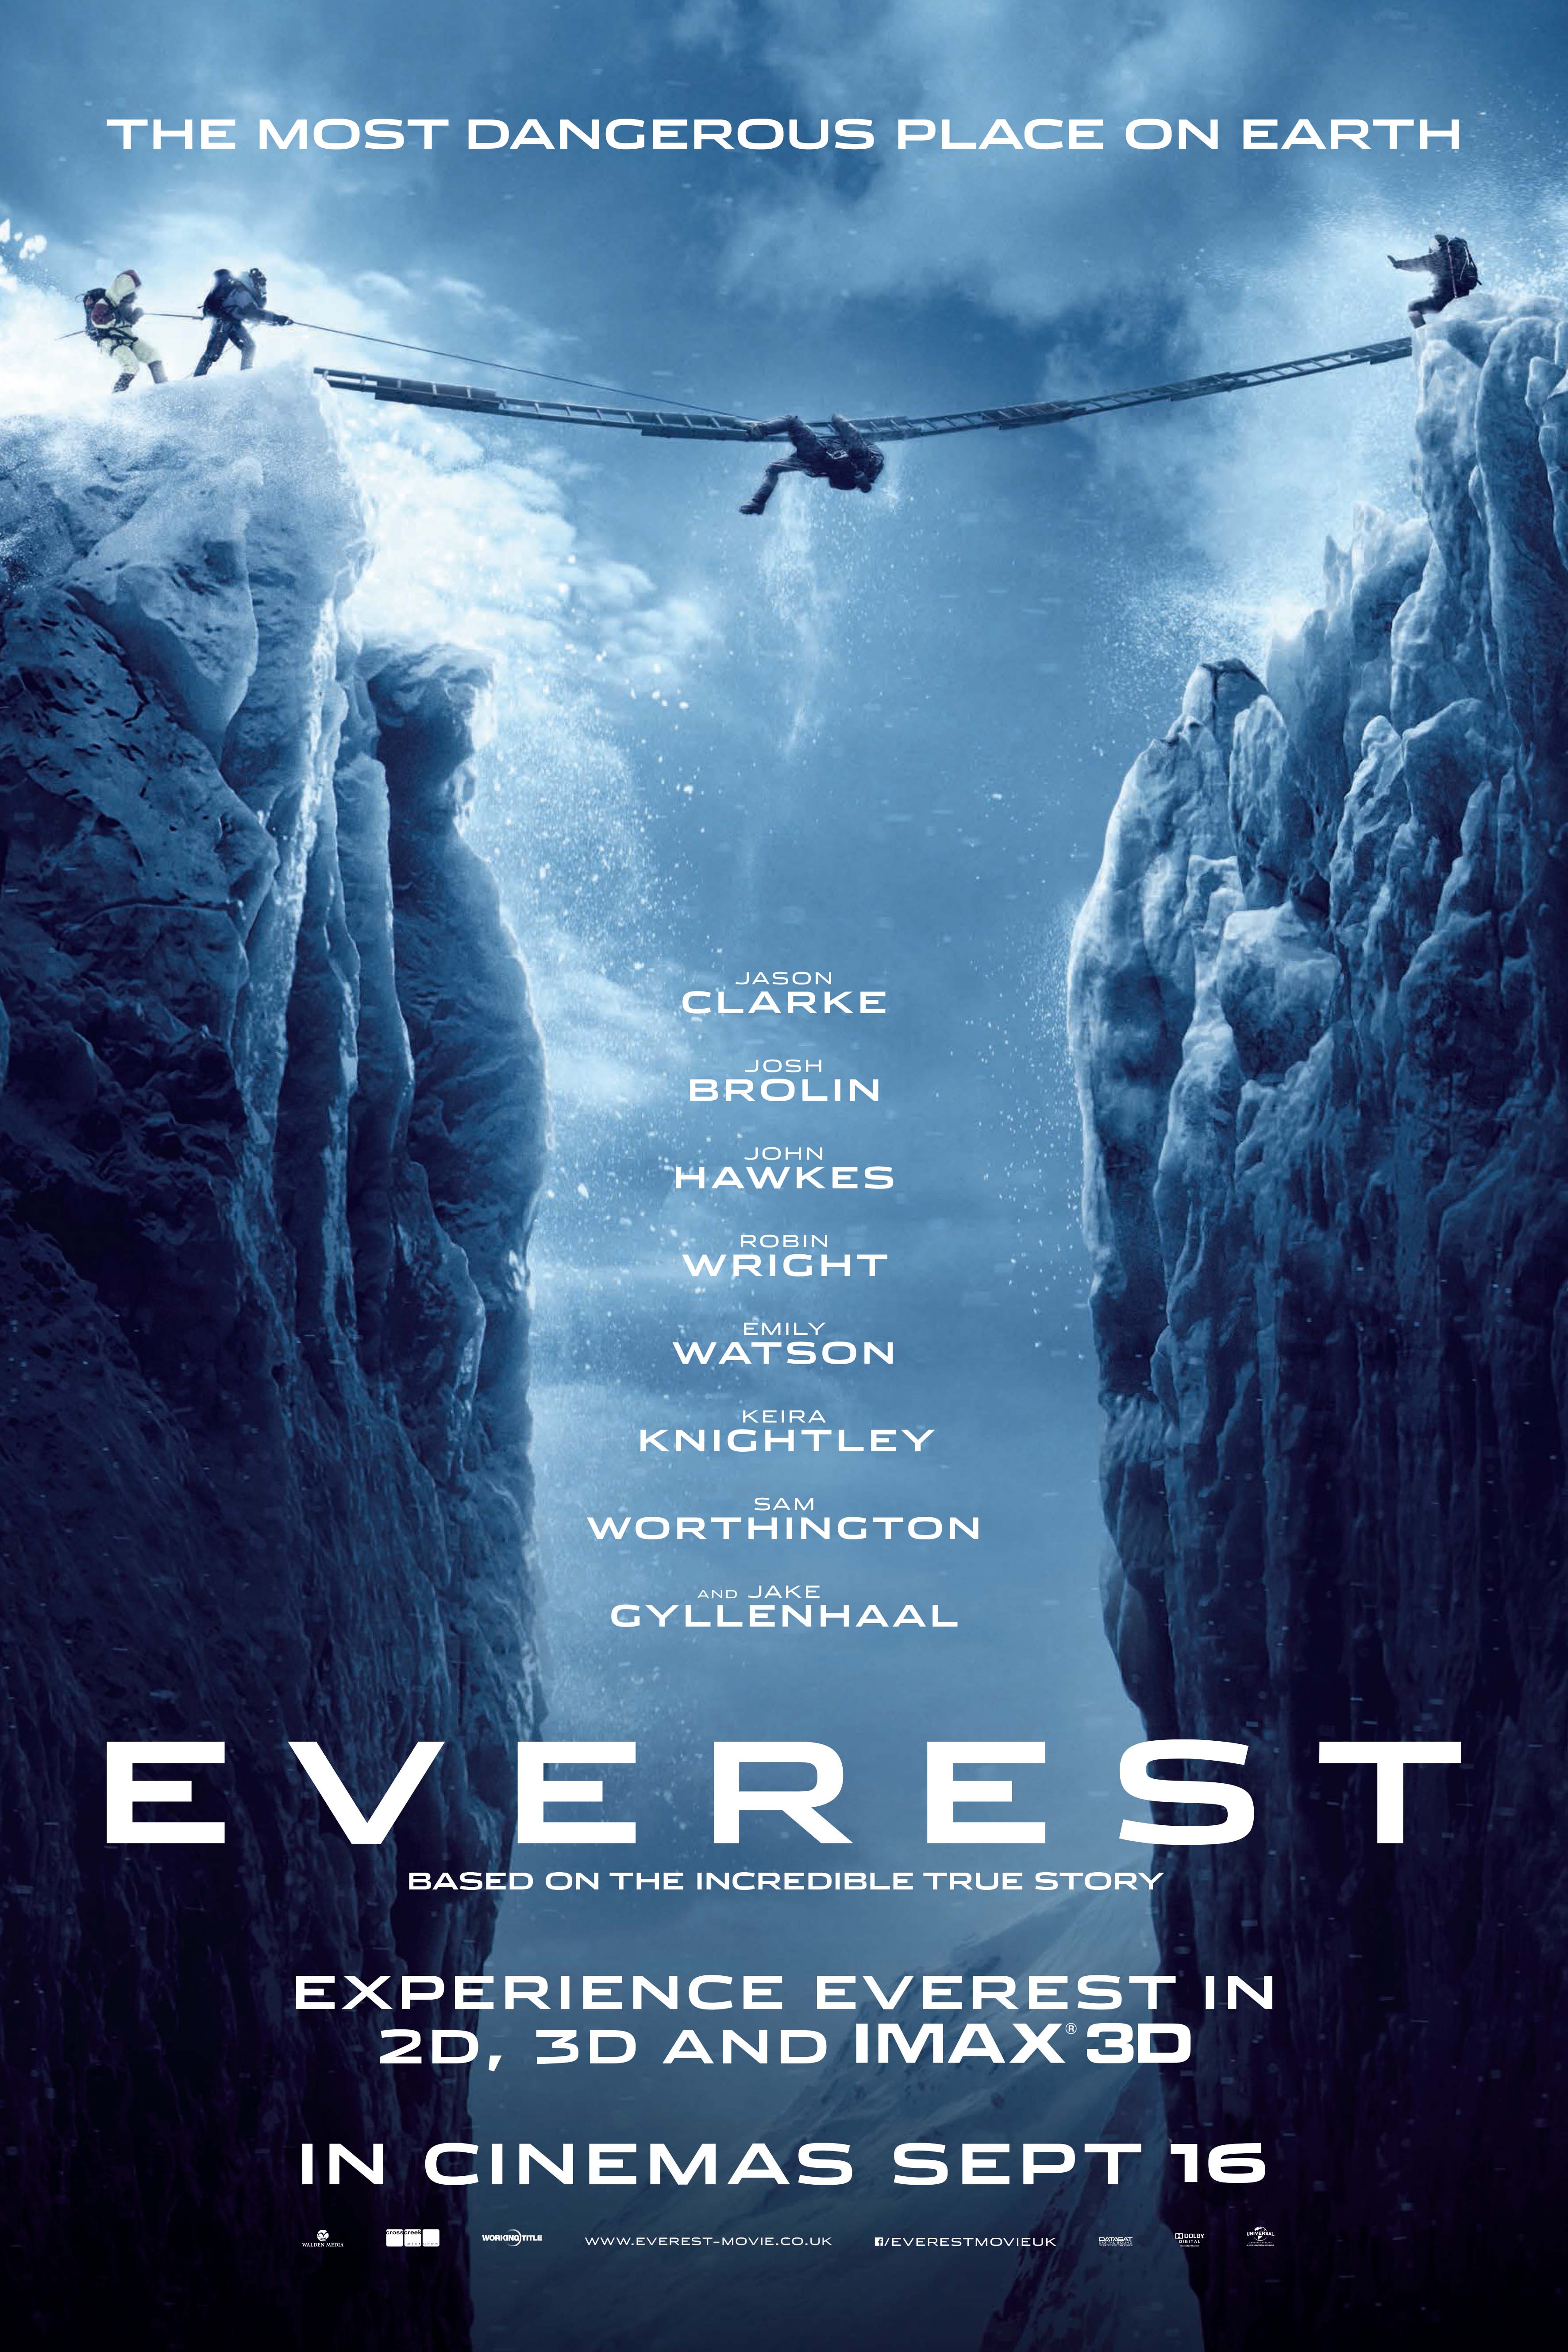 Film poster for the movie Everest